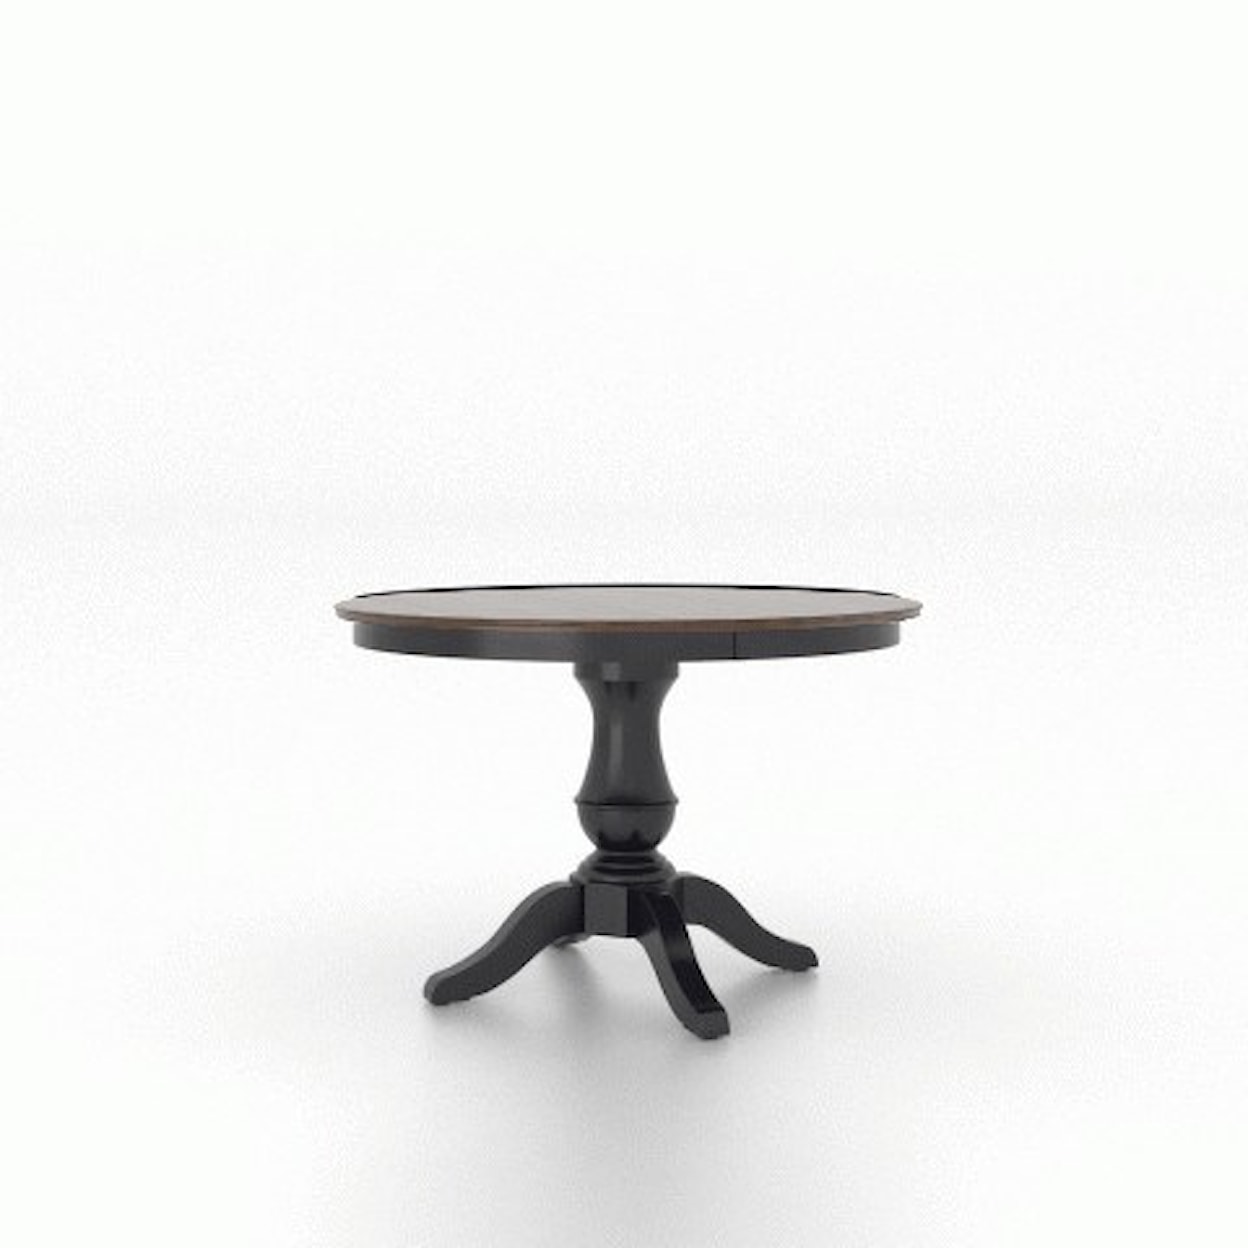 Canadel Gourmet Customizable Round Table w/ Pedestal